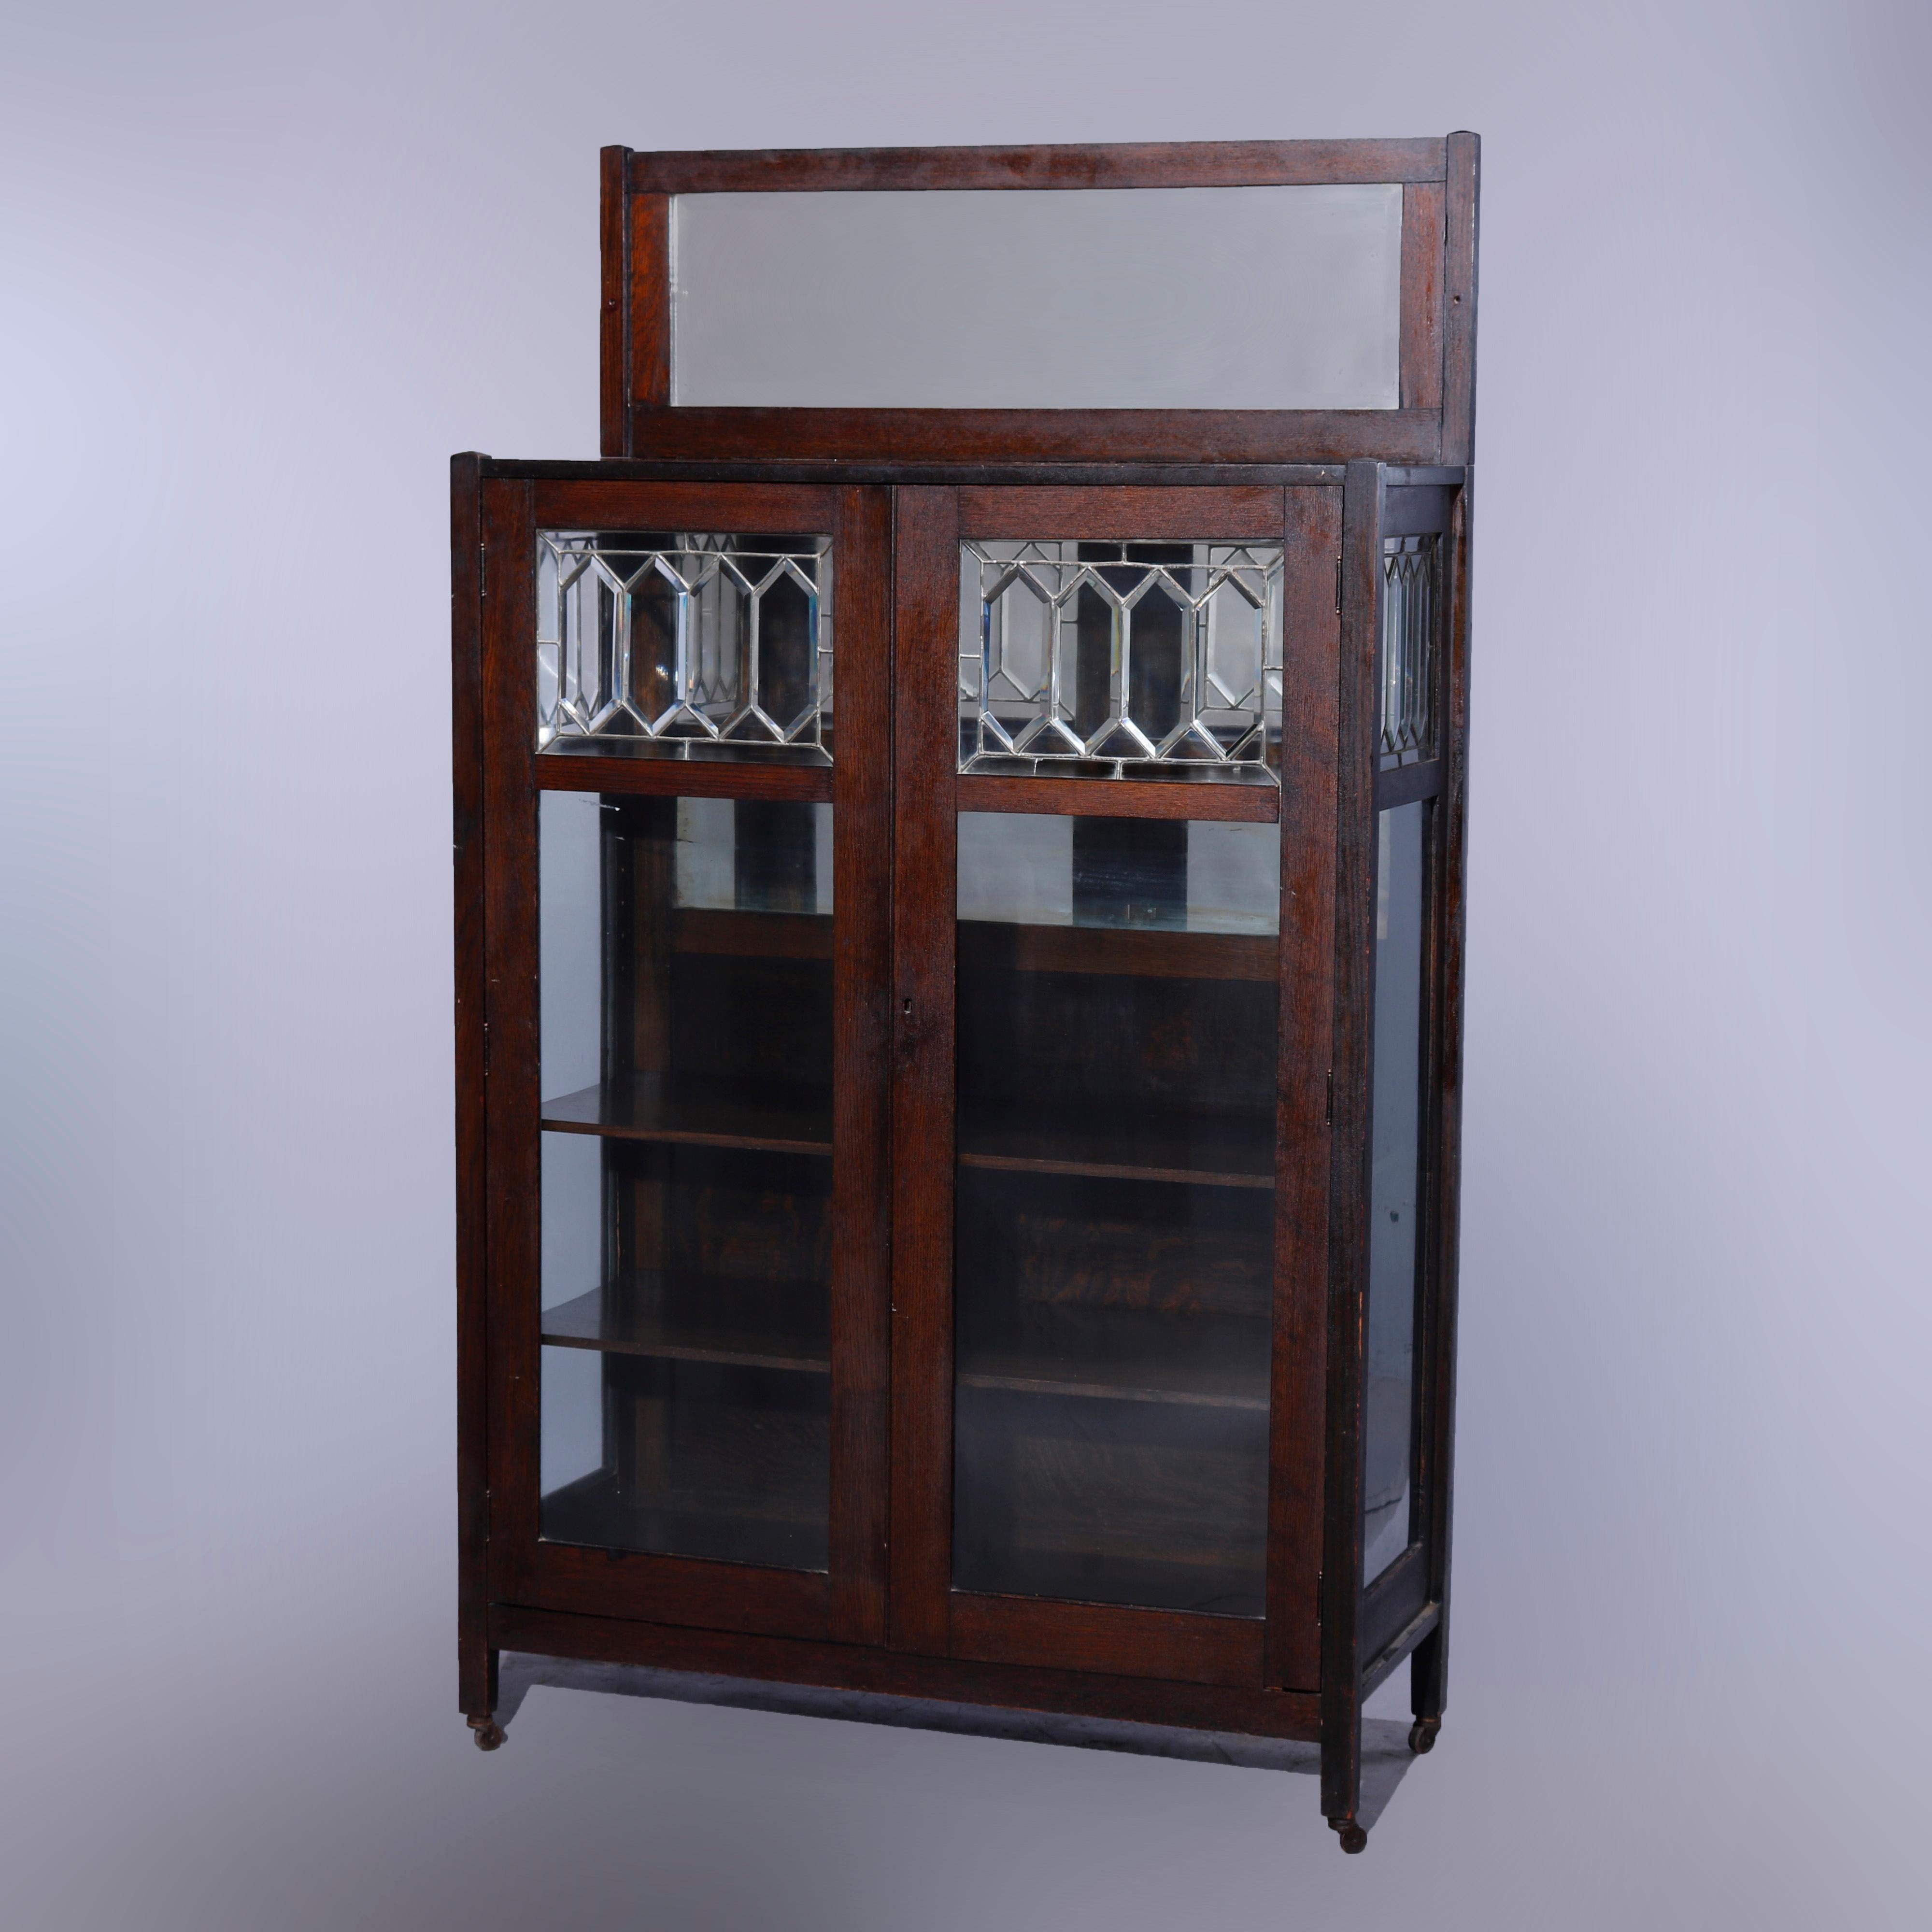 An antique Arts & Crafts mission china cabinet in the manner of Stickley offers quarter sawn oak construction with beveled mirror backsplash surmounting case with double leaded glass doors opening to mirrored and shelved interior, raised on straight